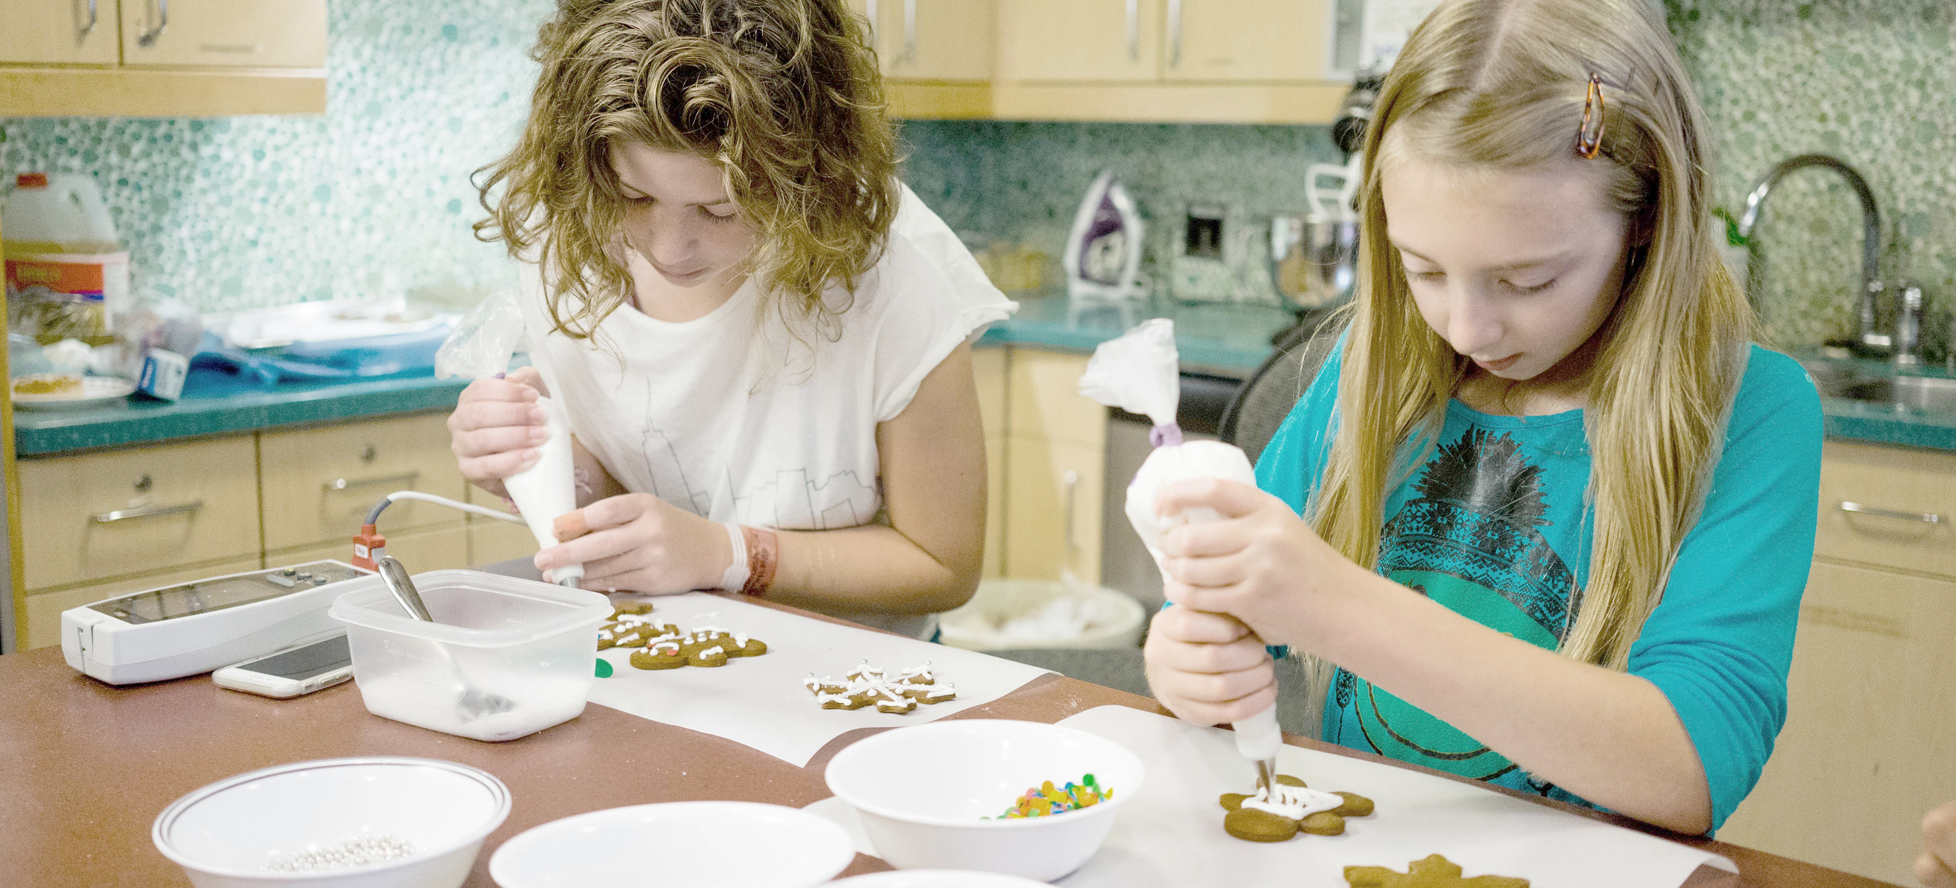 two girls decorating cookies